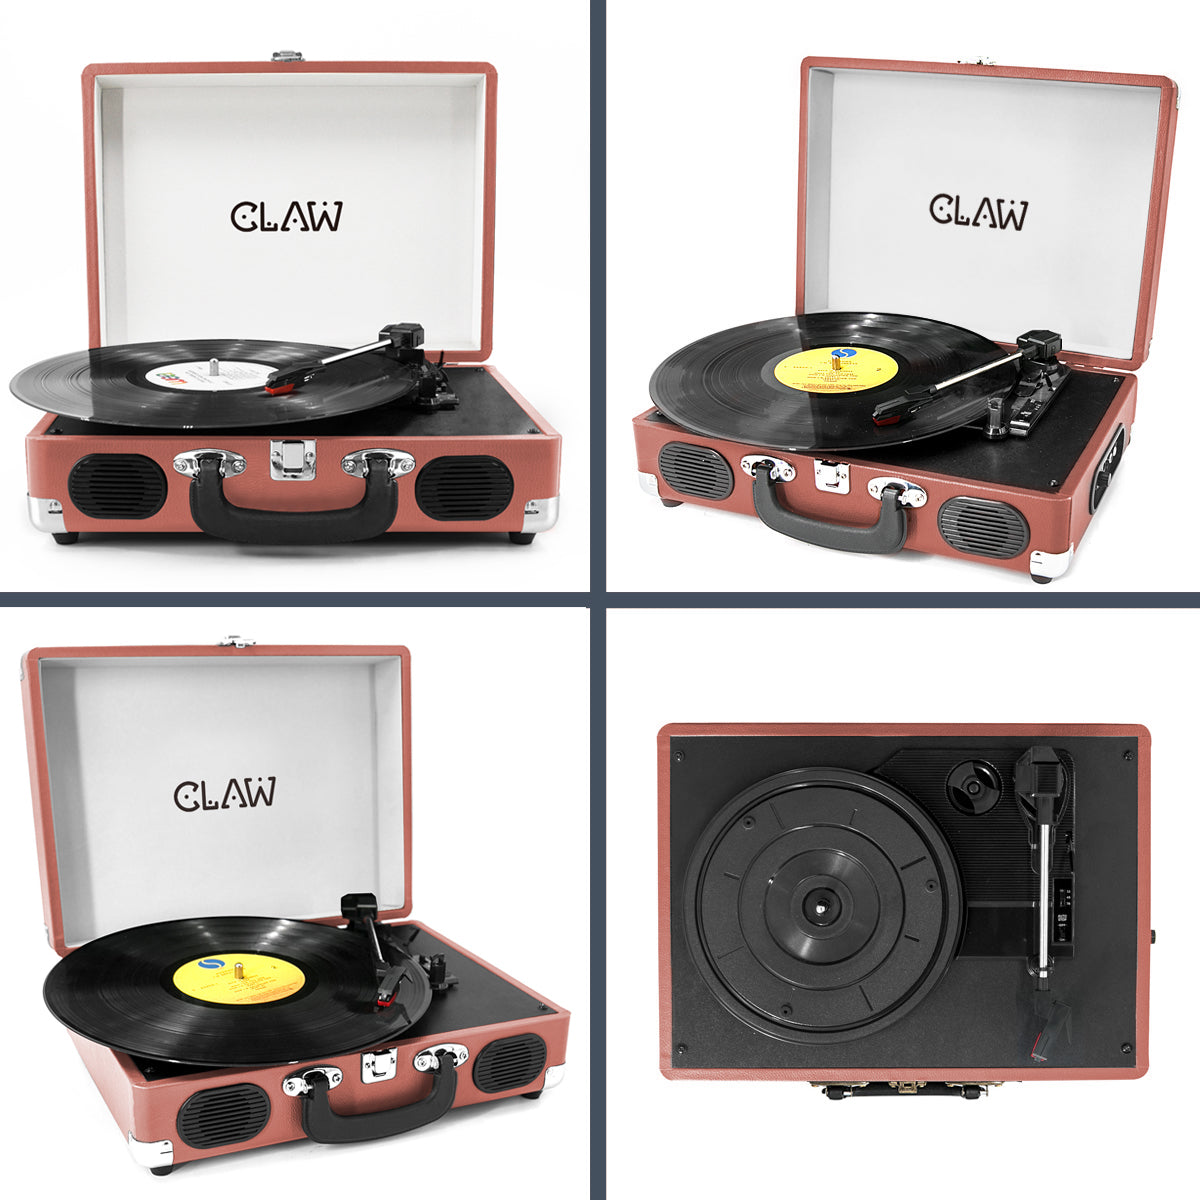 CLAW Stag Portable - Turntable with built-in stereo speaker (Pink) (Use Code Origin5 to Get 5% Discount)